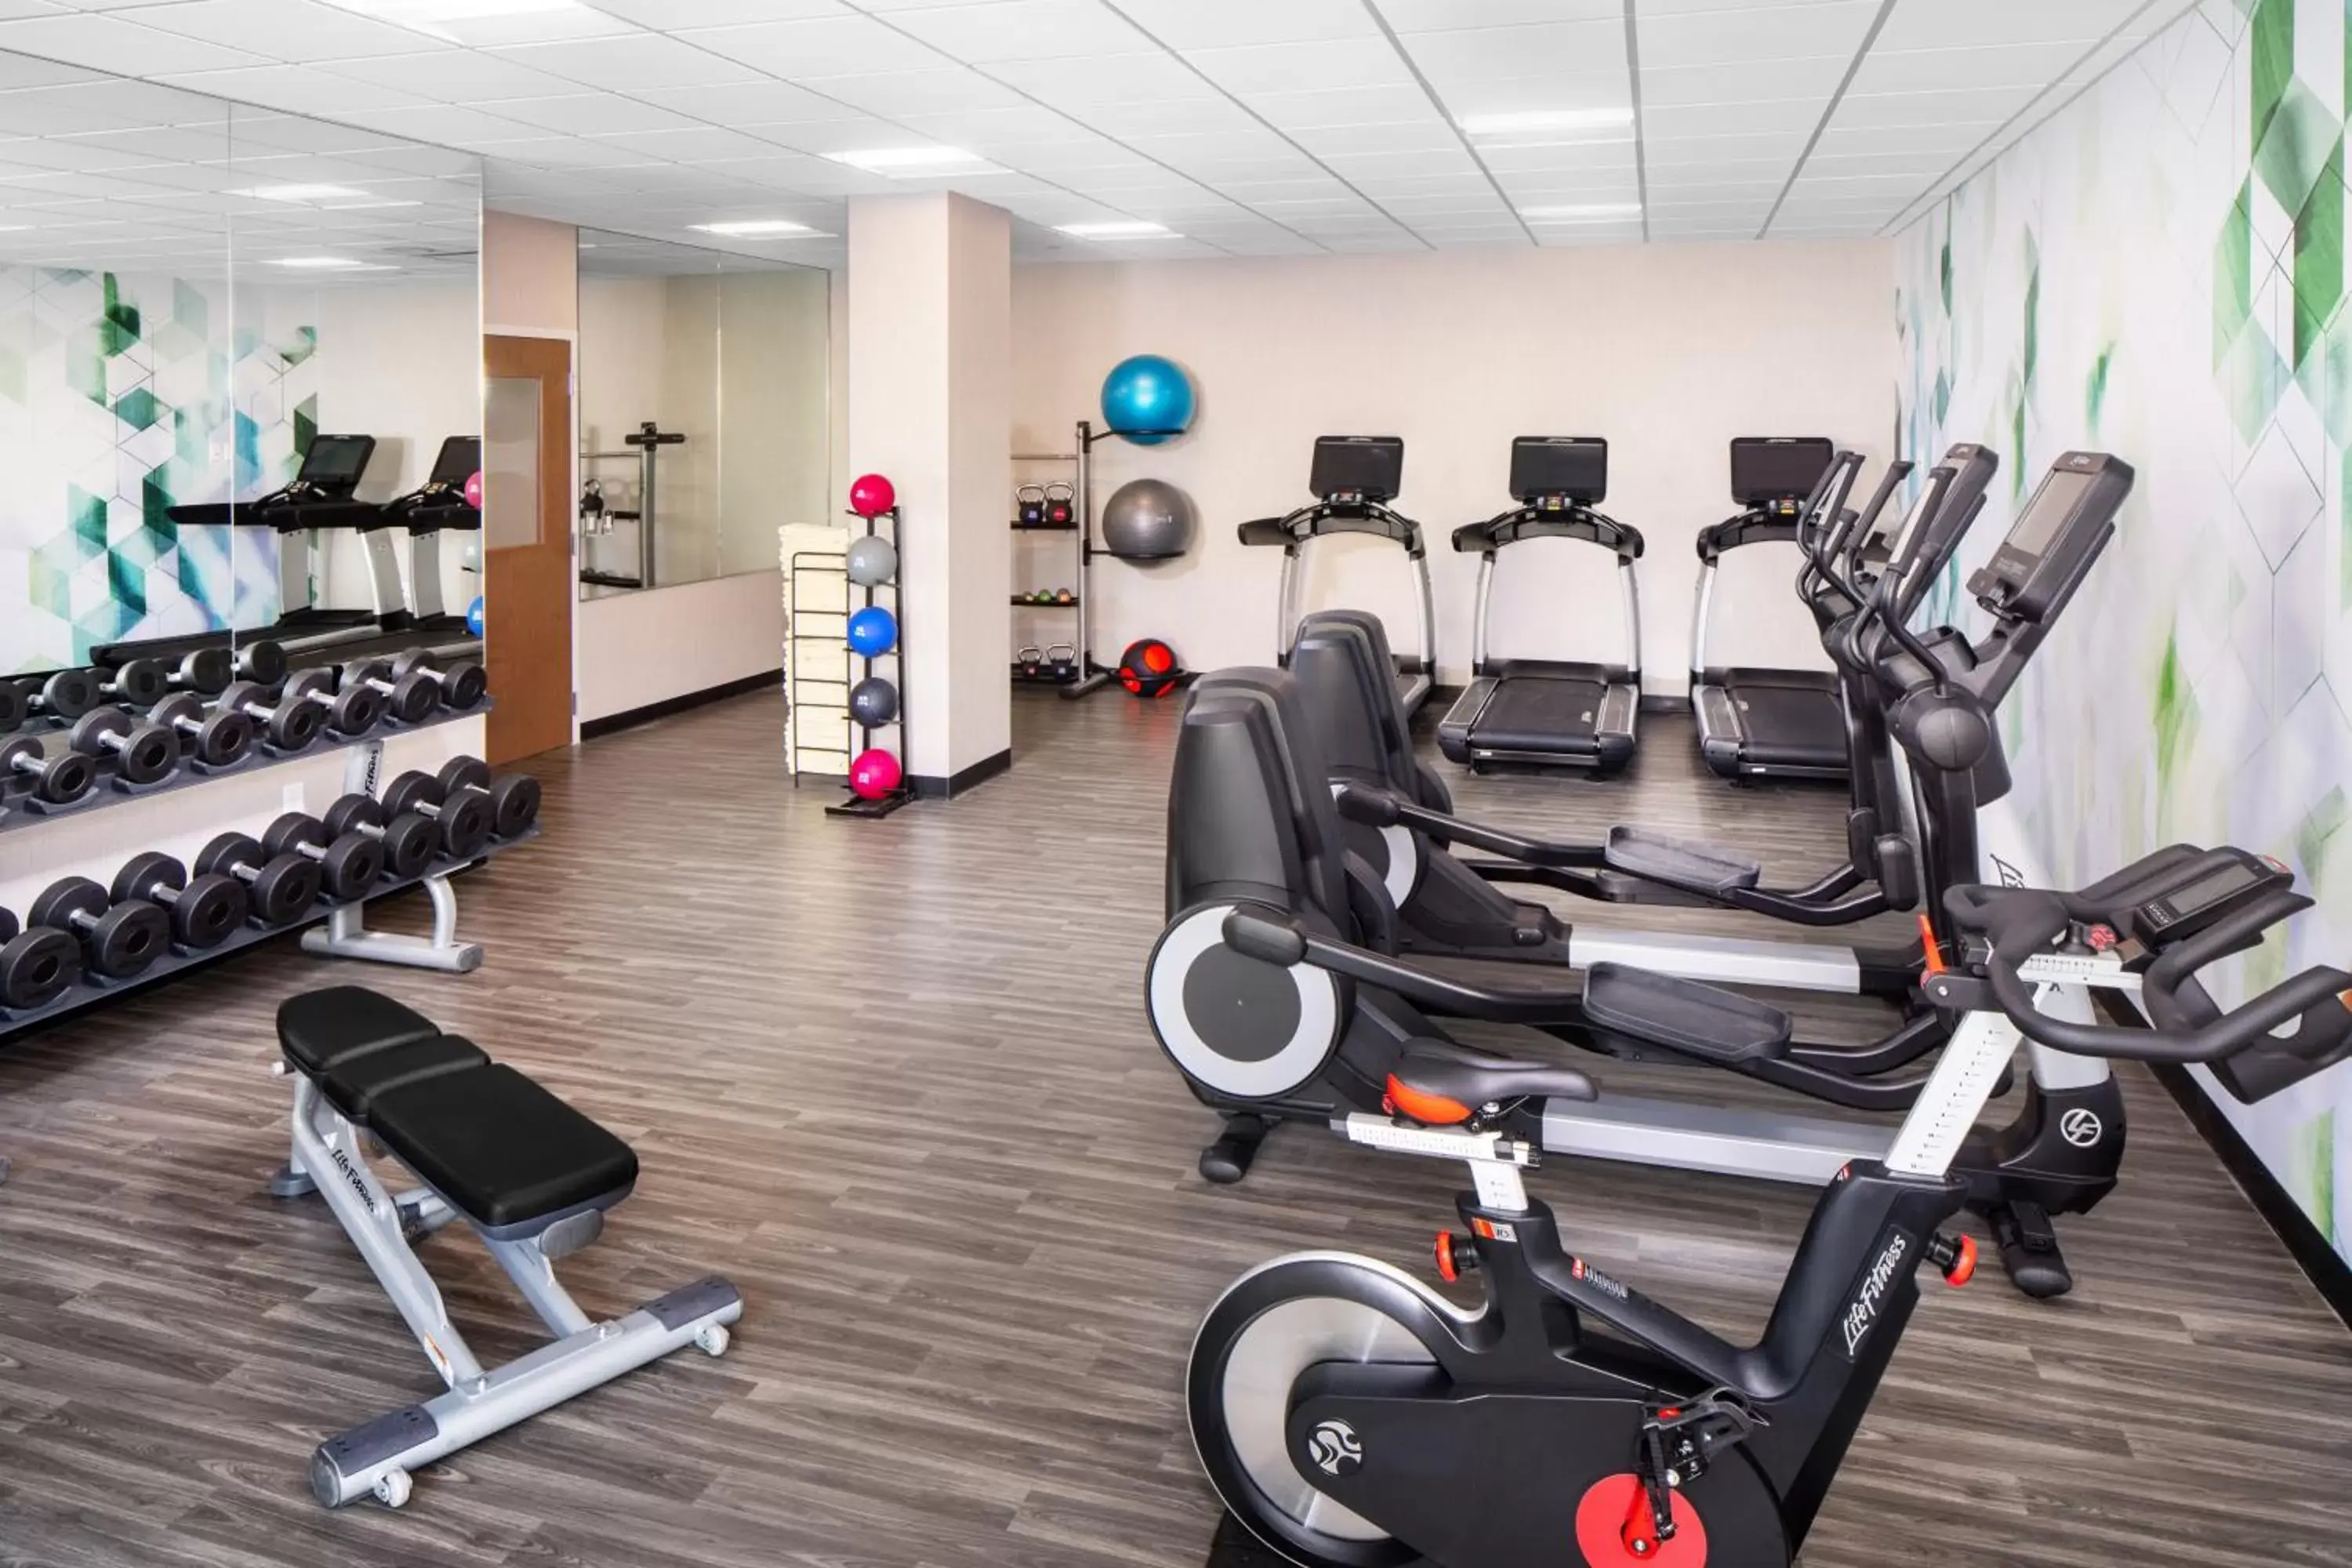 Fitness centre/facilities, Fitness Center/Facilities in Hyatt Place Scottsdale North